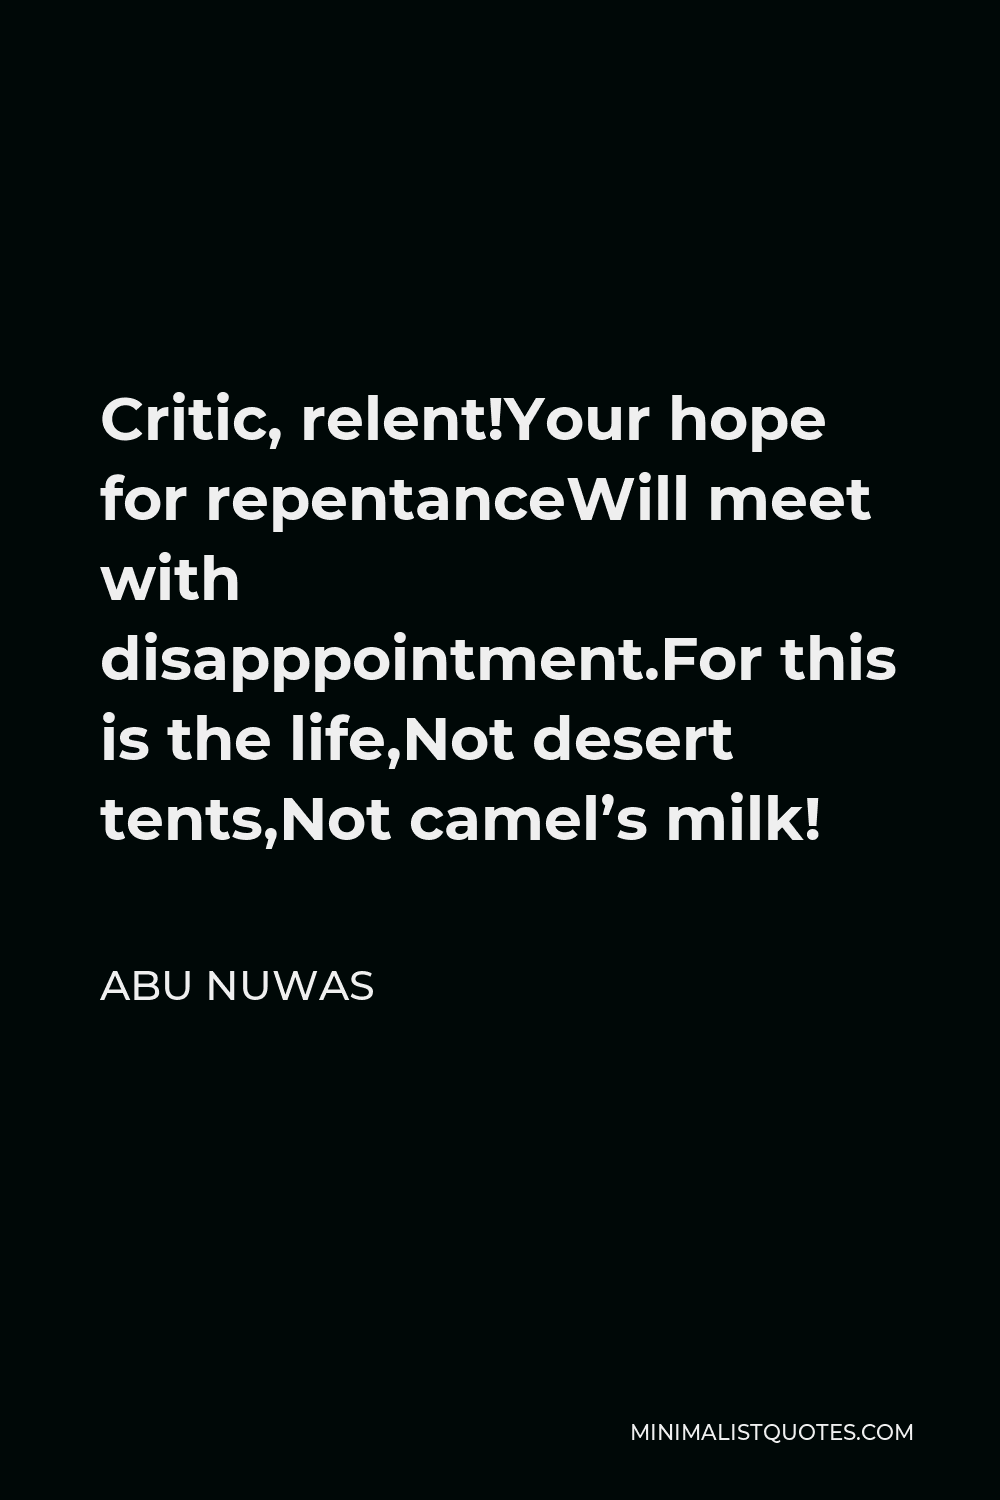 Abu Nuwas Quote - Critic, relent!Your hope for repentanceWill meet with disapppointment.For this is the life,Not desert tents,Not camel’s milk!